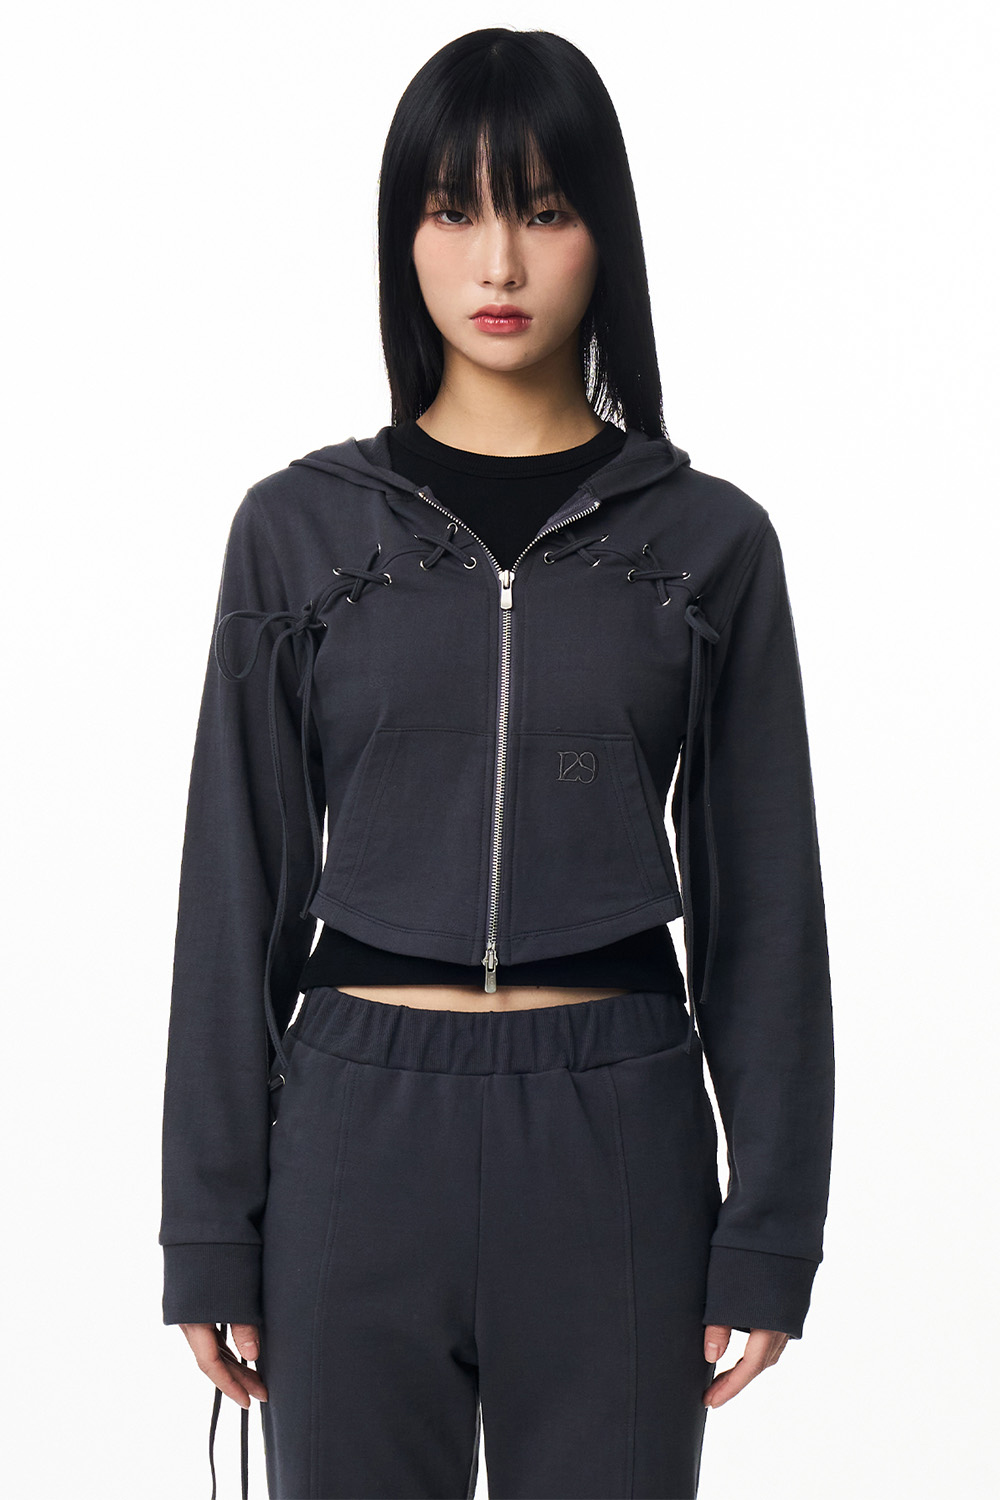 Eyelet Lace Up Hood Zip-Up Charcoal